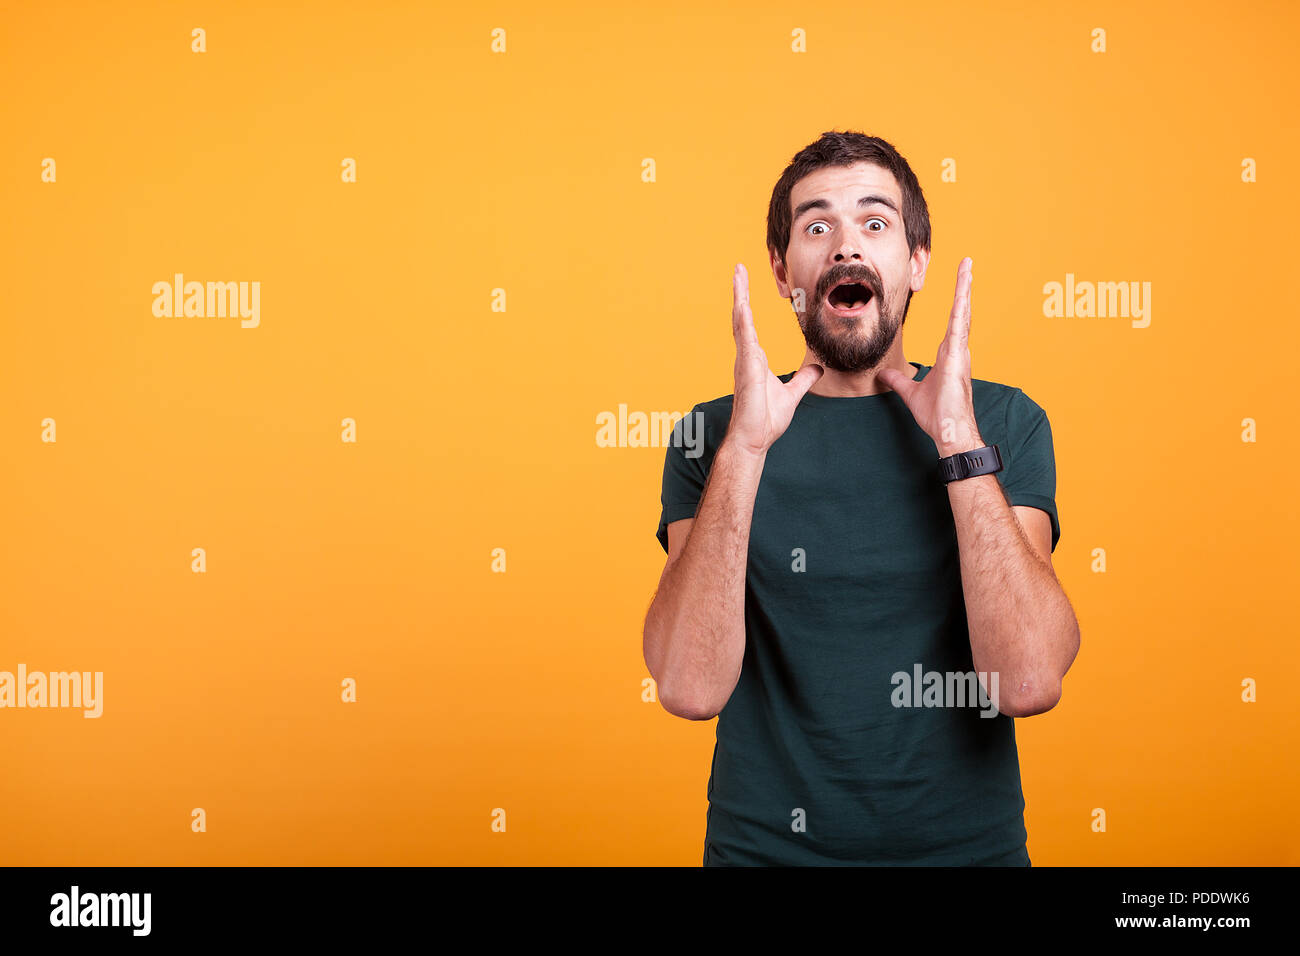 Shocked man with hands at his face looking at the camera. Copyspace available for your advertisement or promo Stock Photo